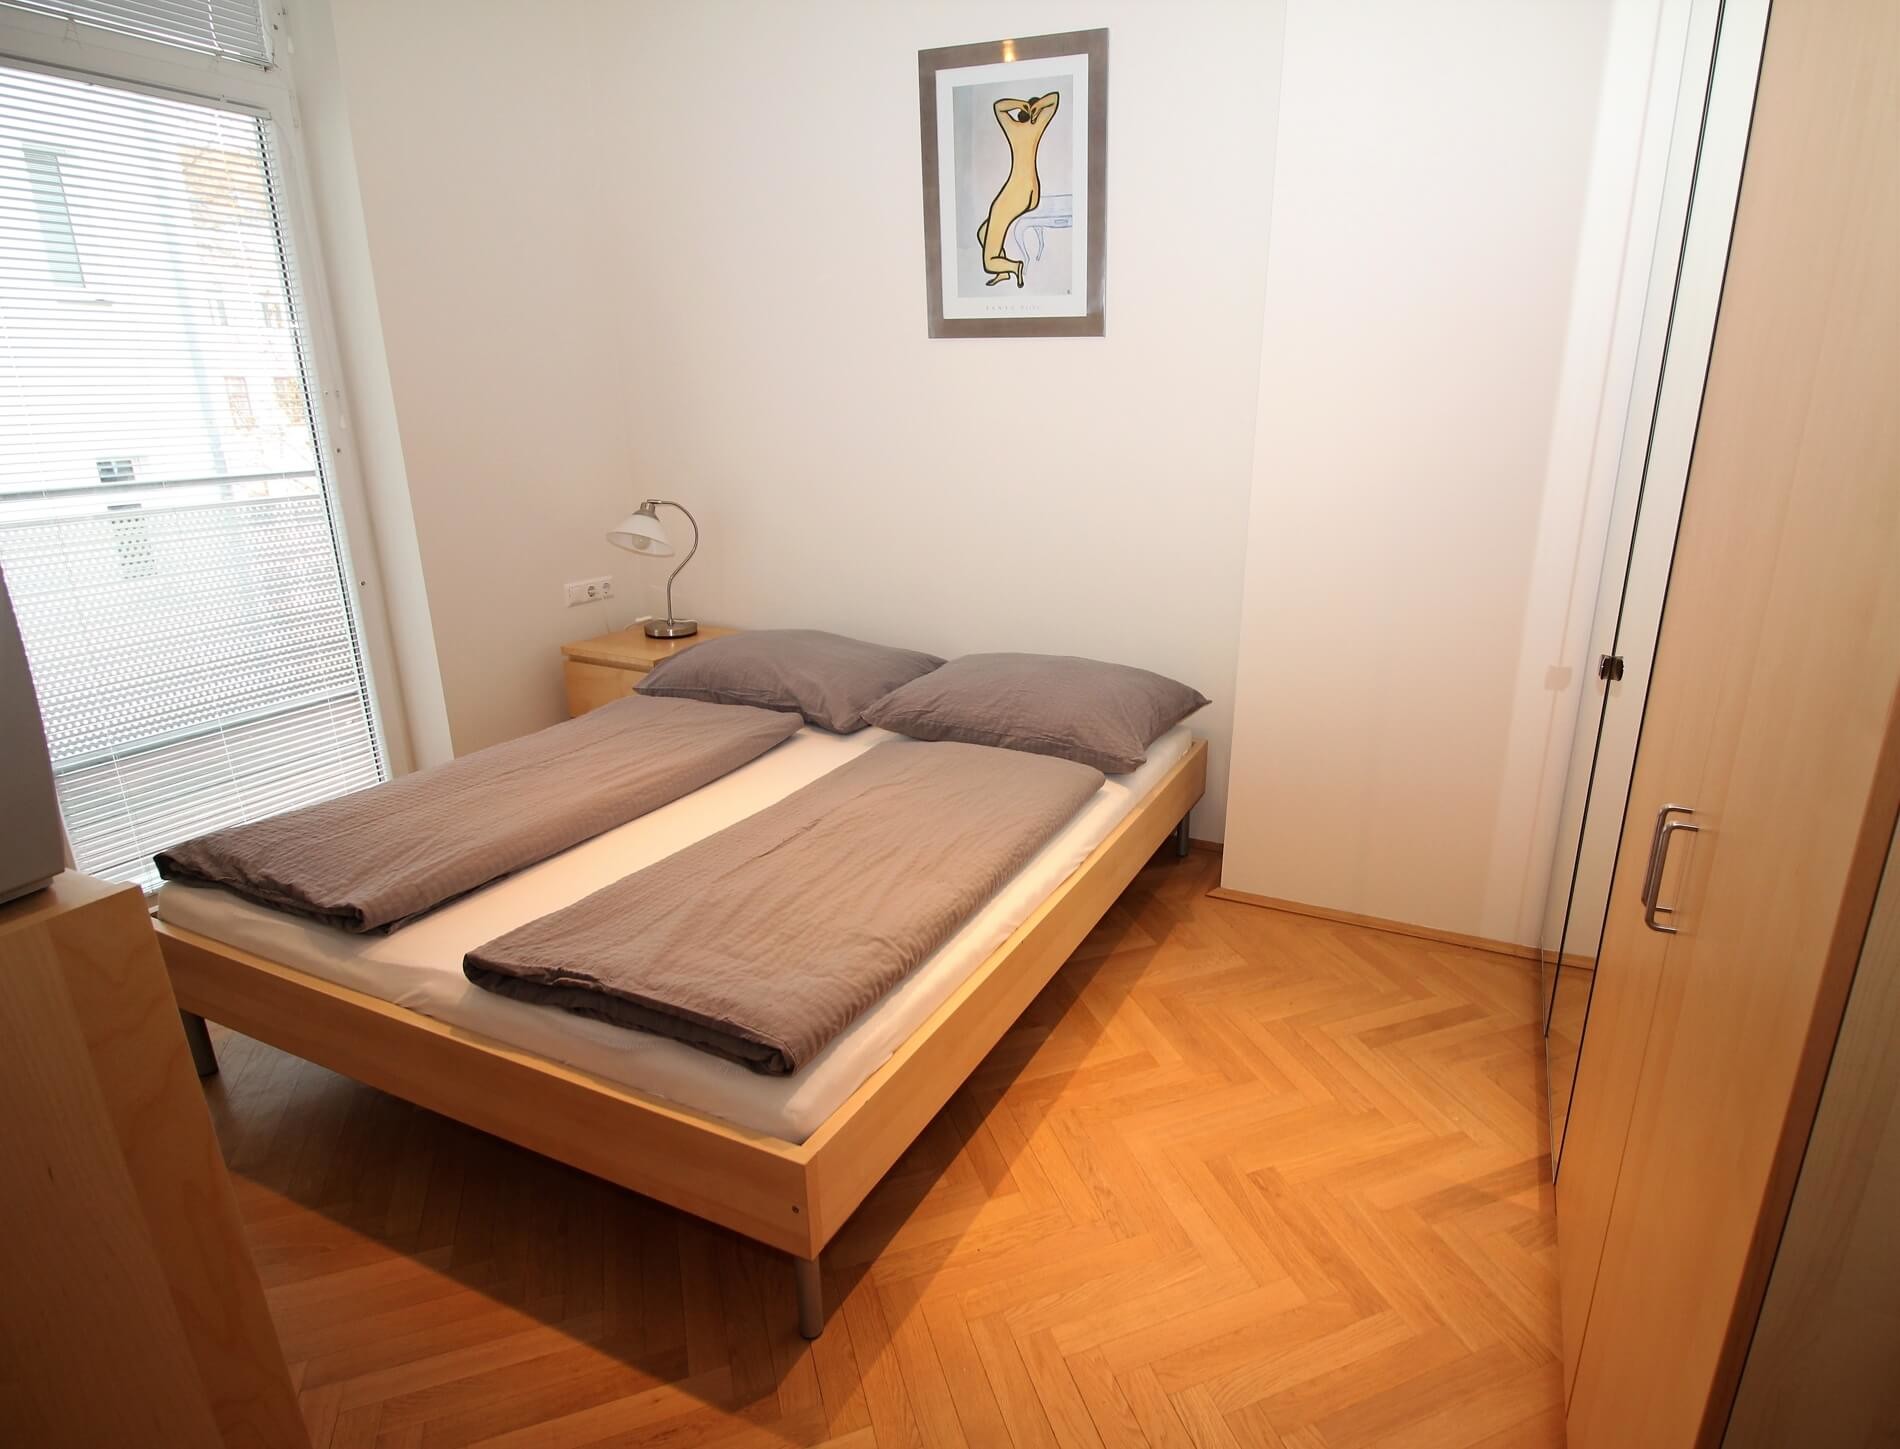 Completely furnished 2-bedroom apartment with Balcony in Vienna (great location) 16